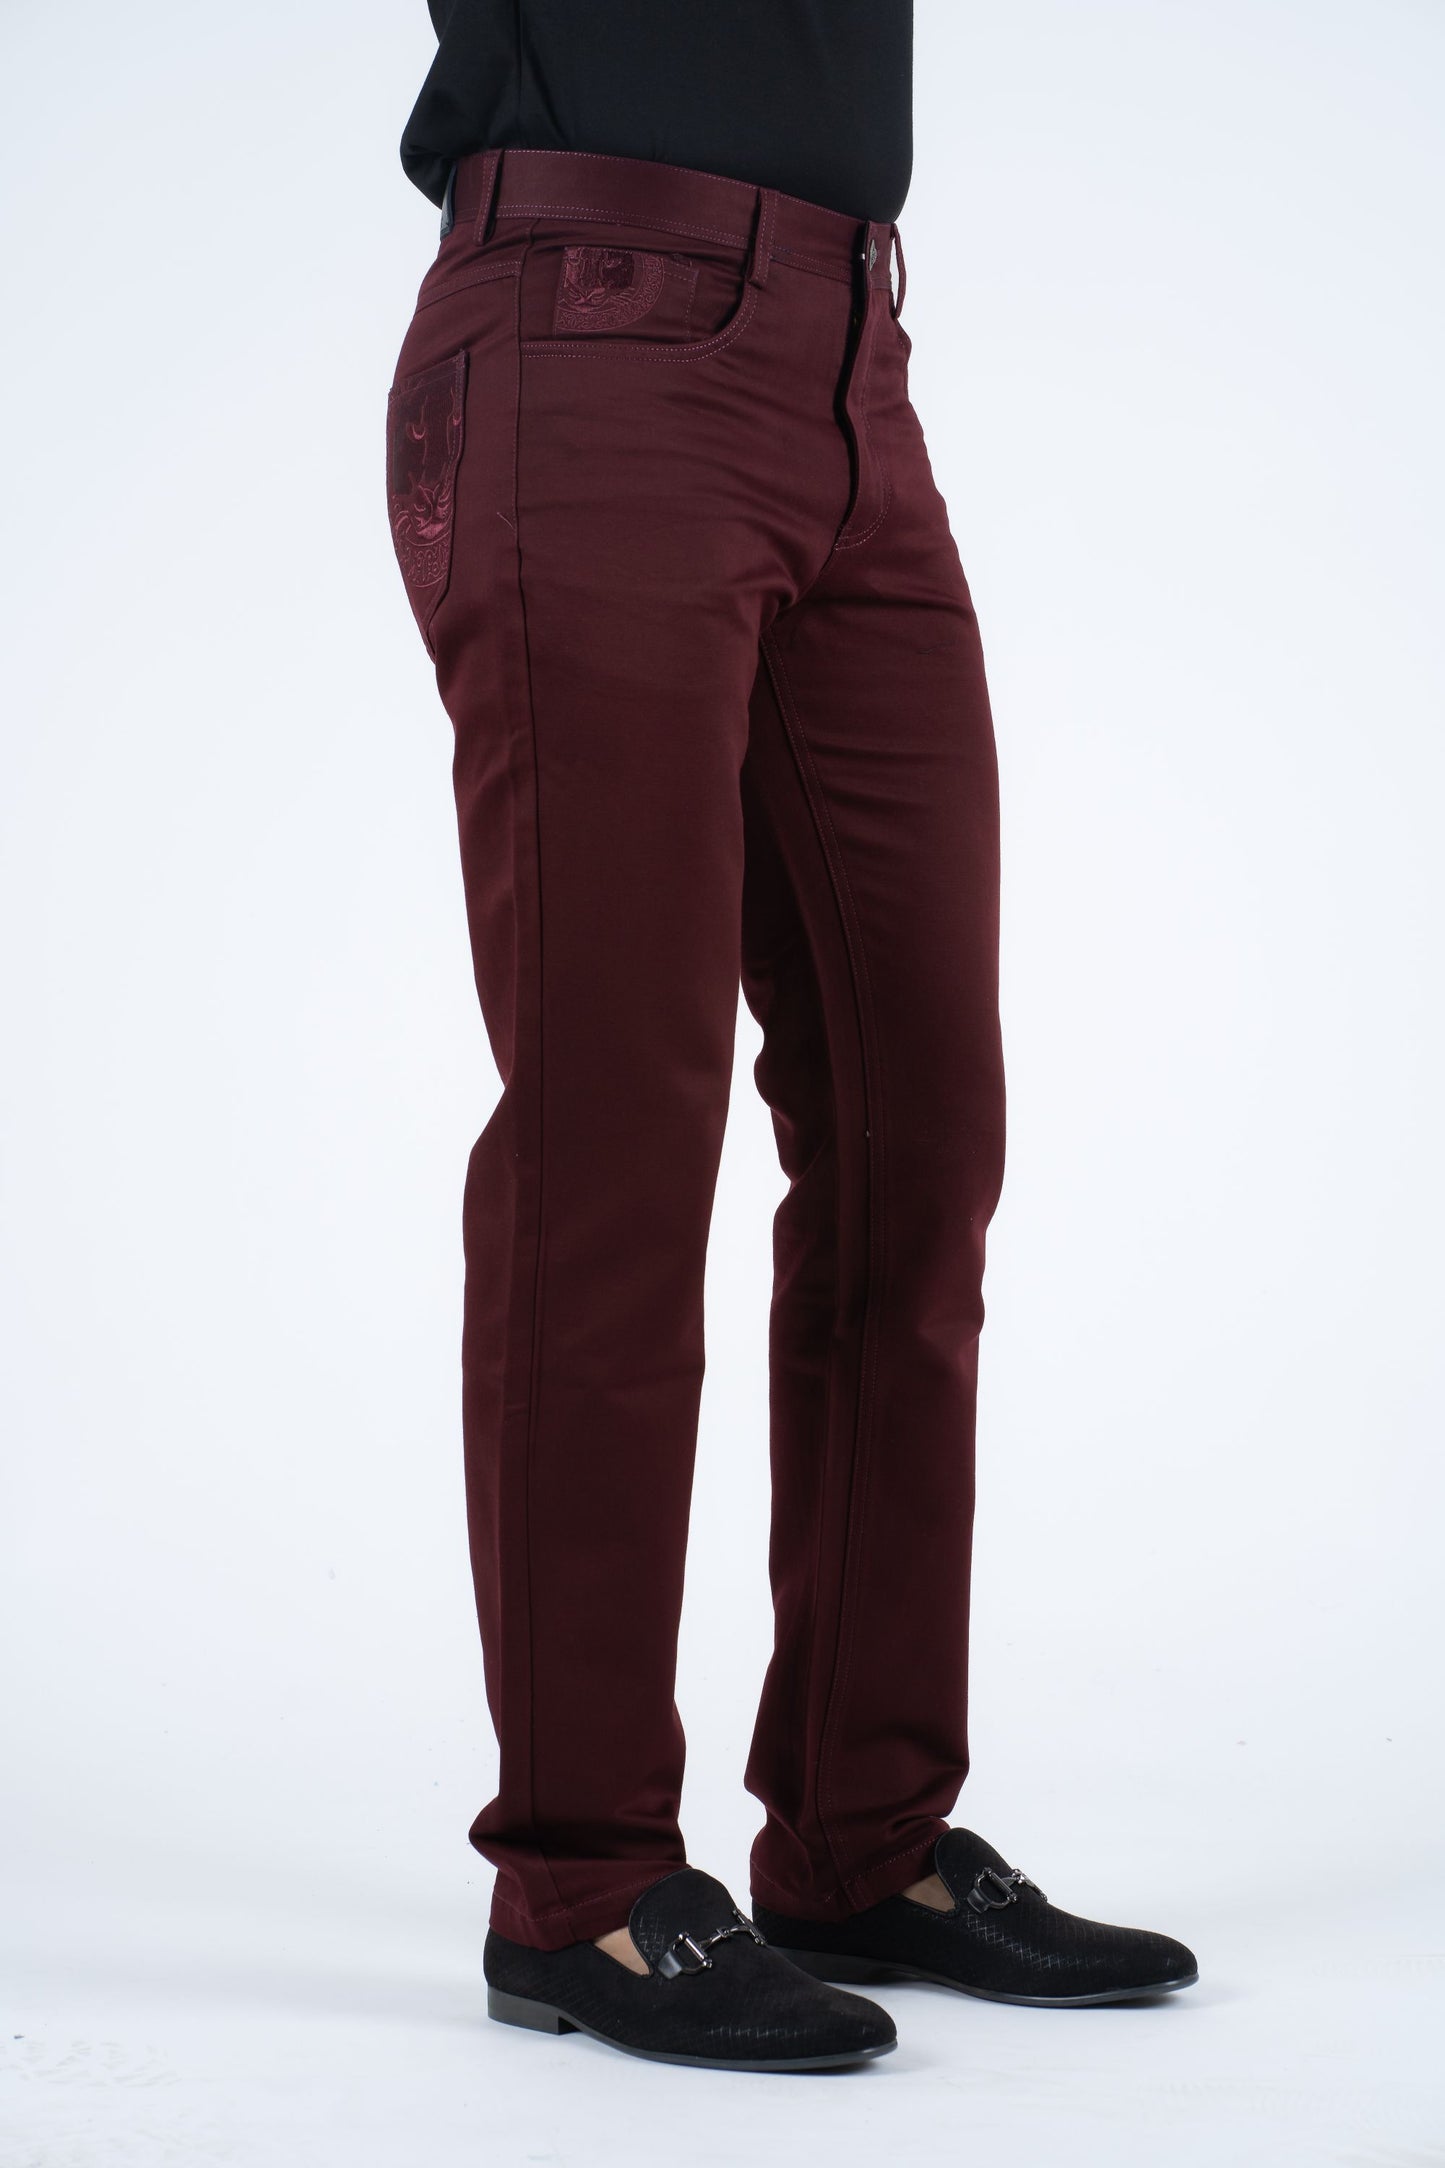 Slade Men's Burgundy Relaxed Fit Stretch Pants